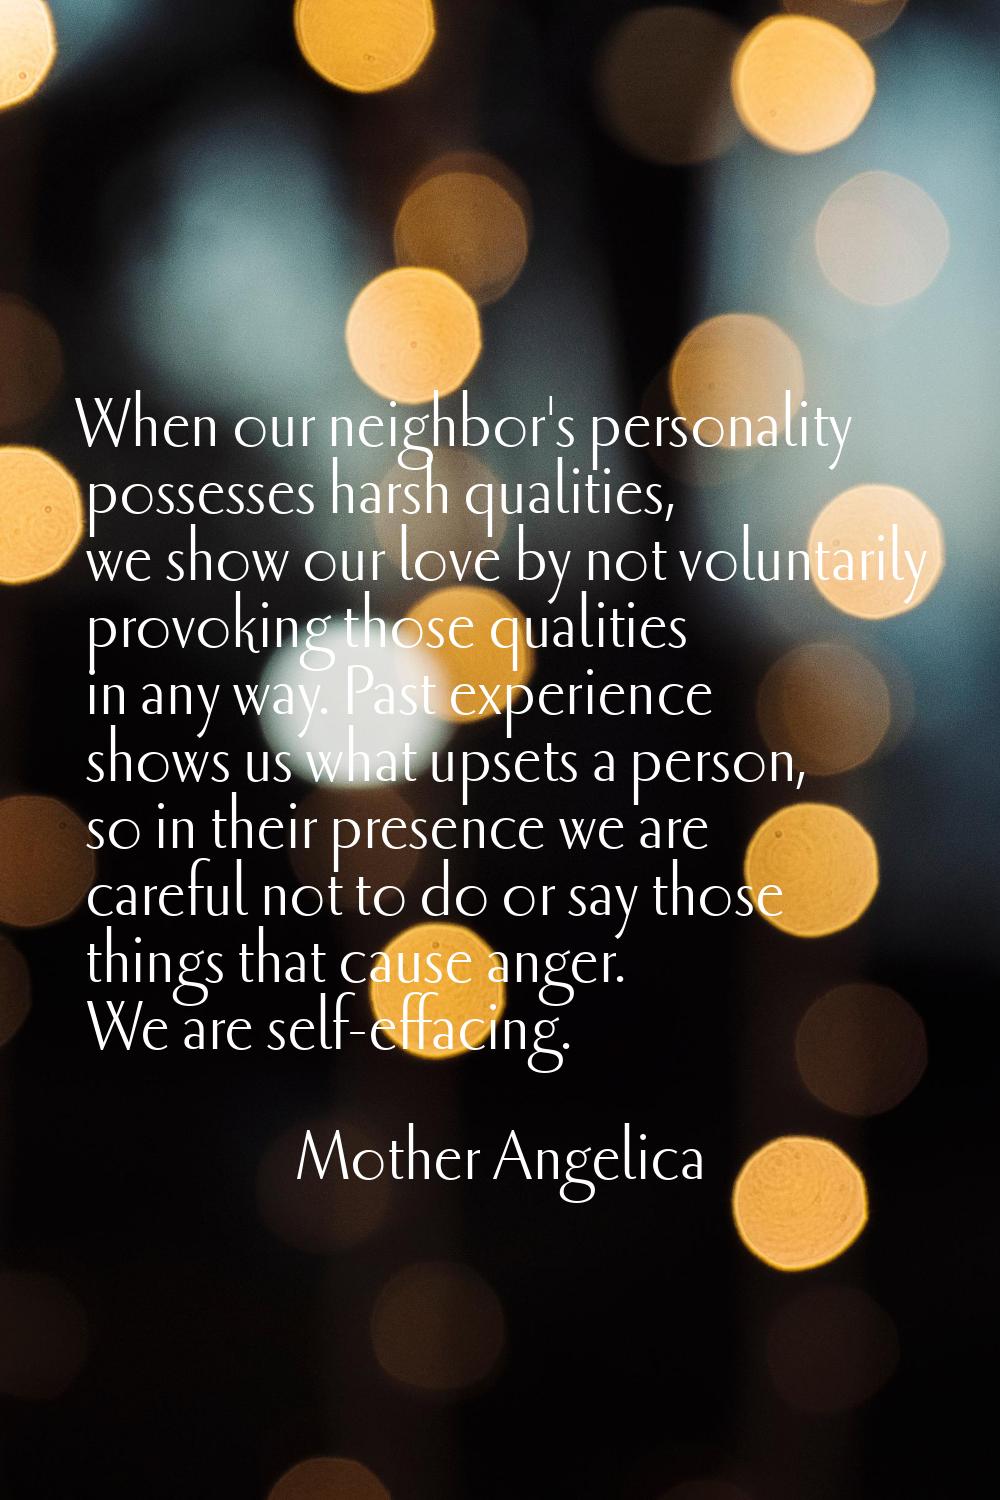 When our neighbor's personality possesses harsh qualities, we show our love by not voluntarily prov